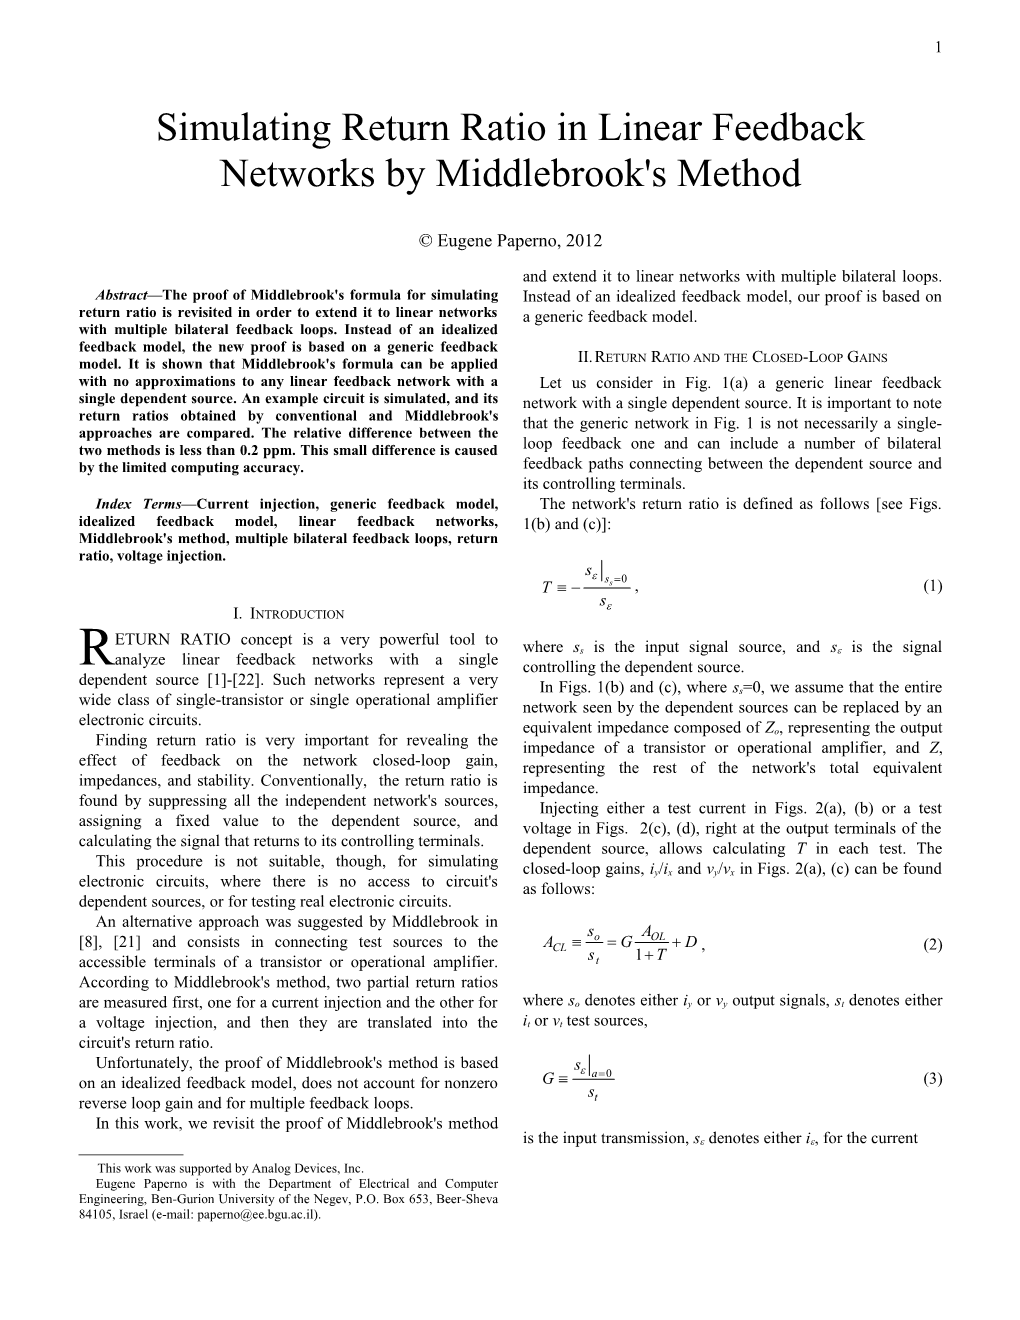 Simulating Return Ratio in Linear Feedback Networks by Middlebrook's Method